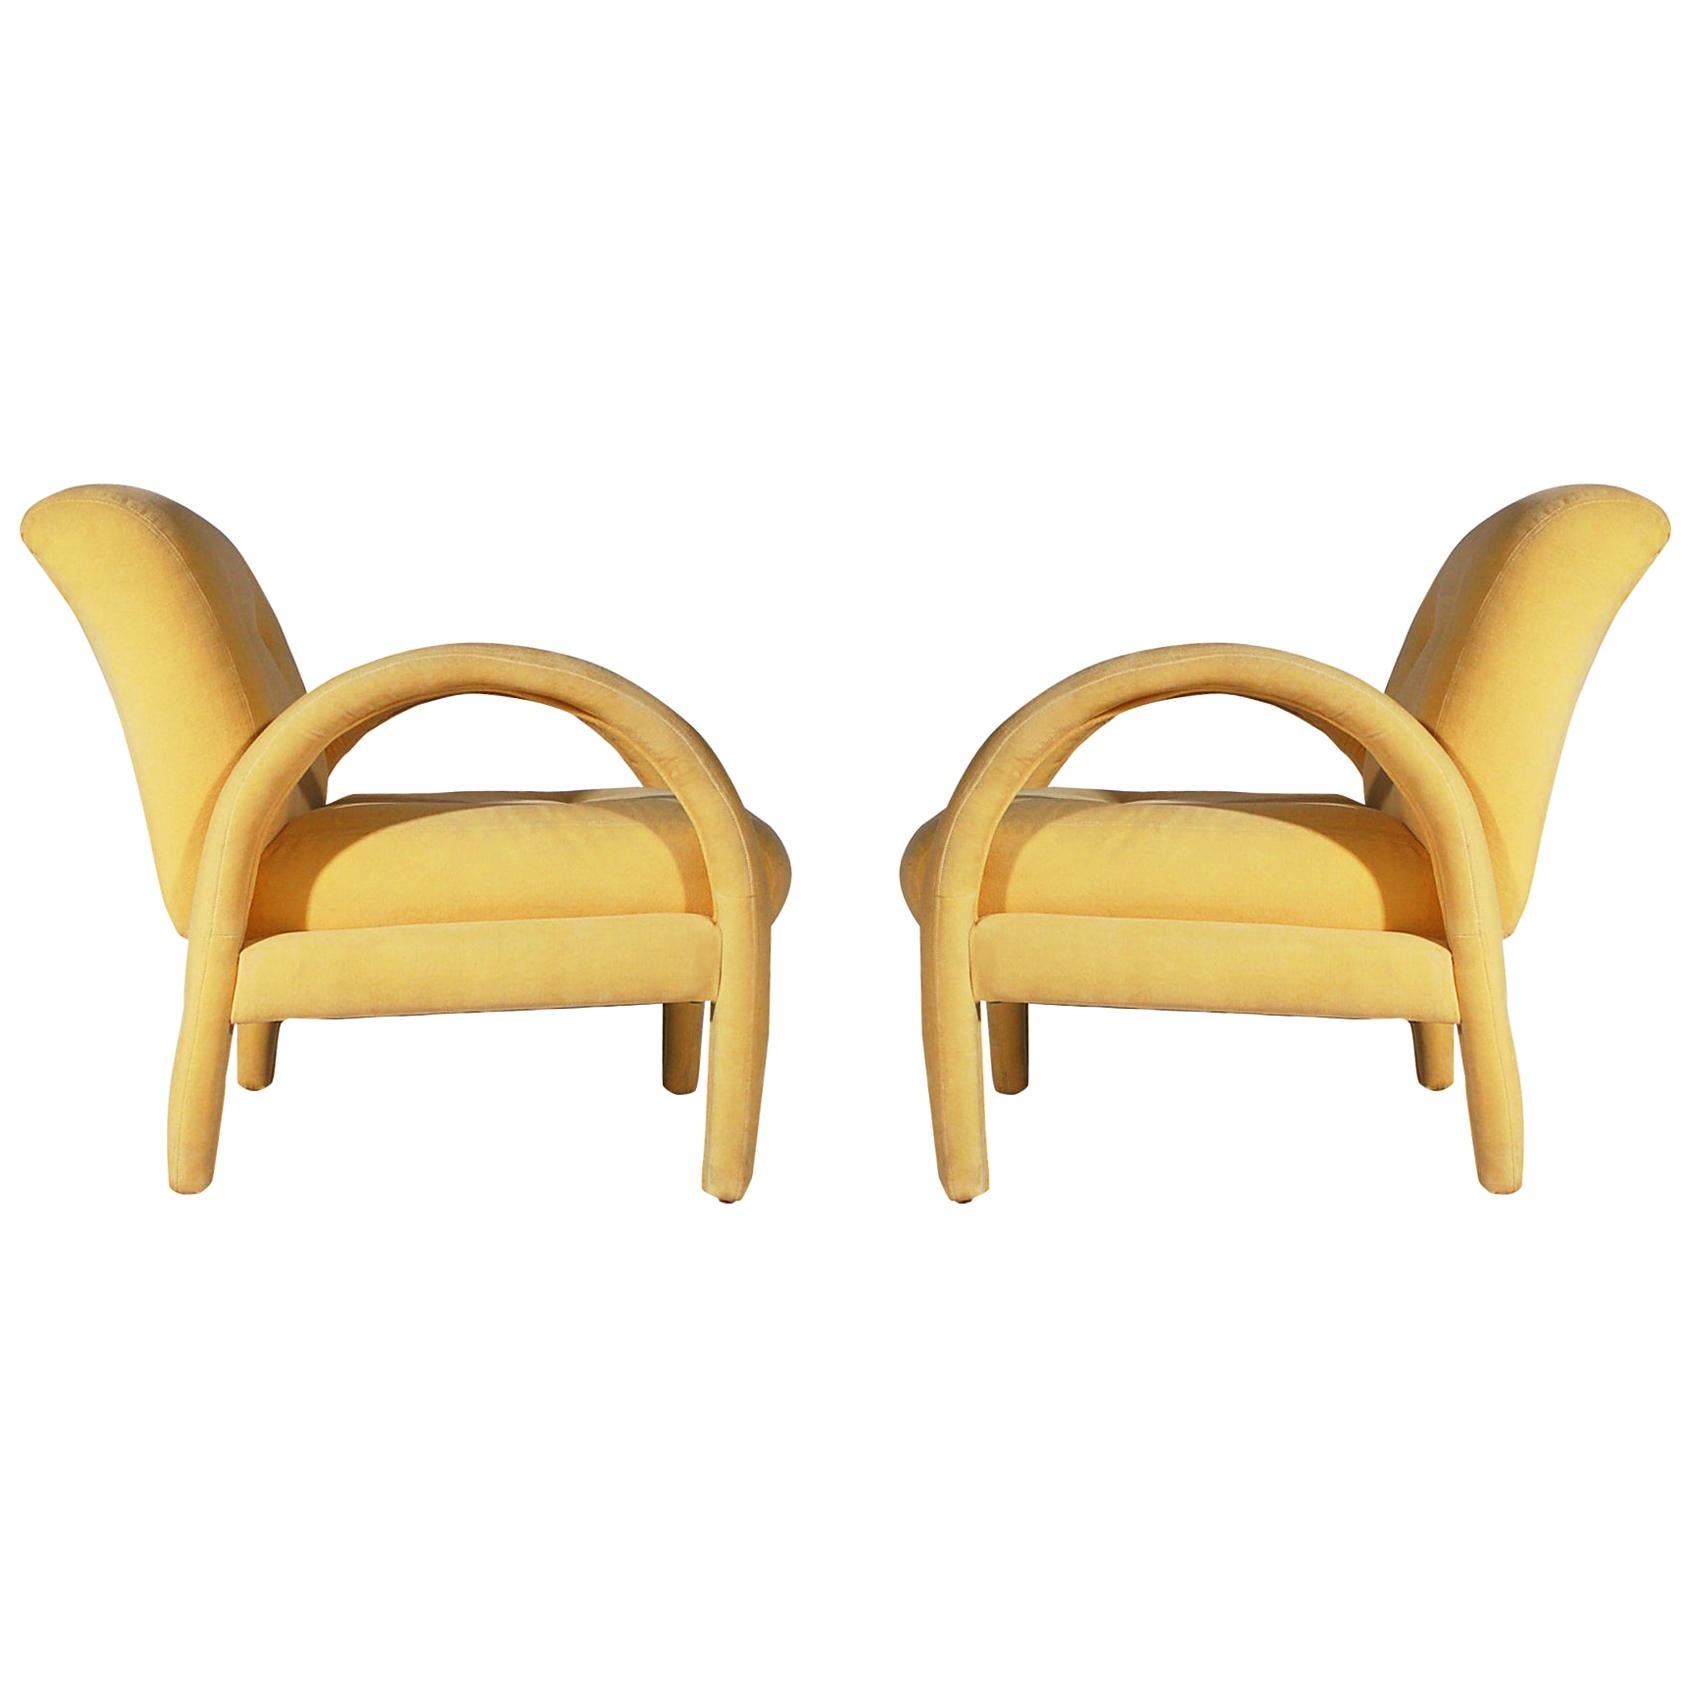 Pair of Mid-Century Modern Club or Lounge Chairs after Milo Baughman in Velvet